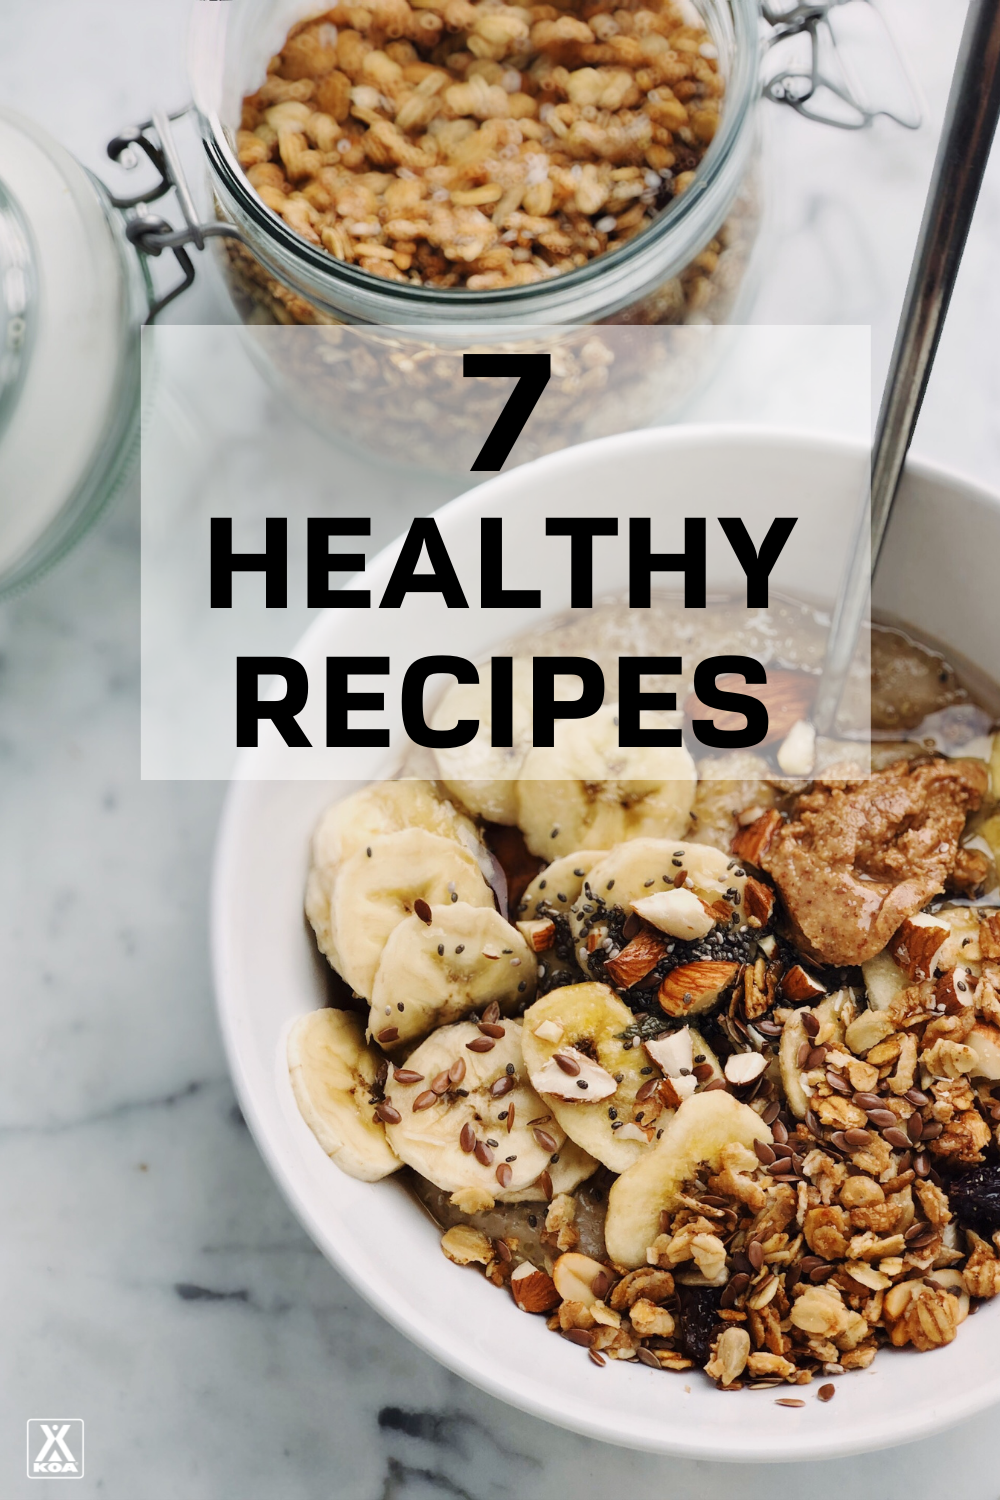 Looking to start the new year off on a healthy note? Try these tasty and healthy recipes you can make when you're camping or at home to stick to your goals.